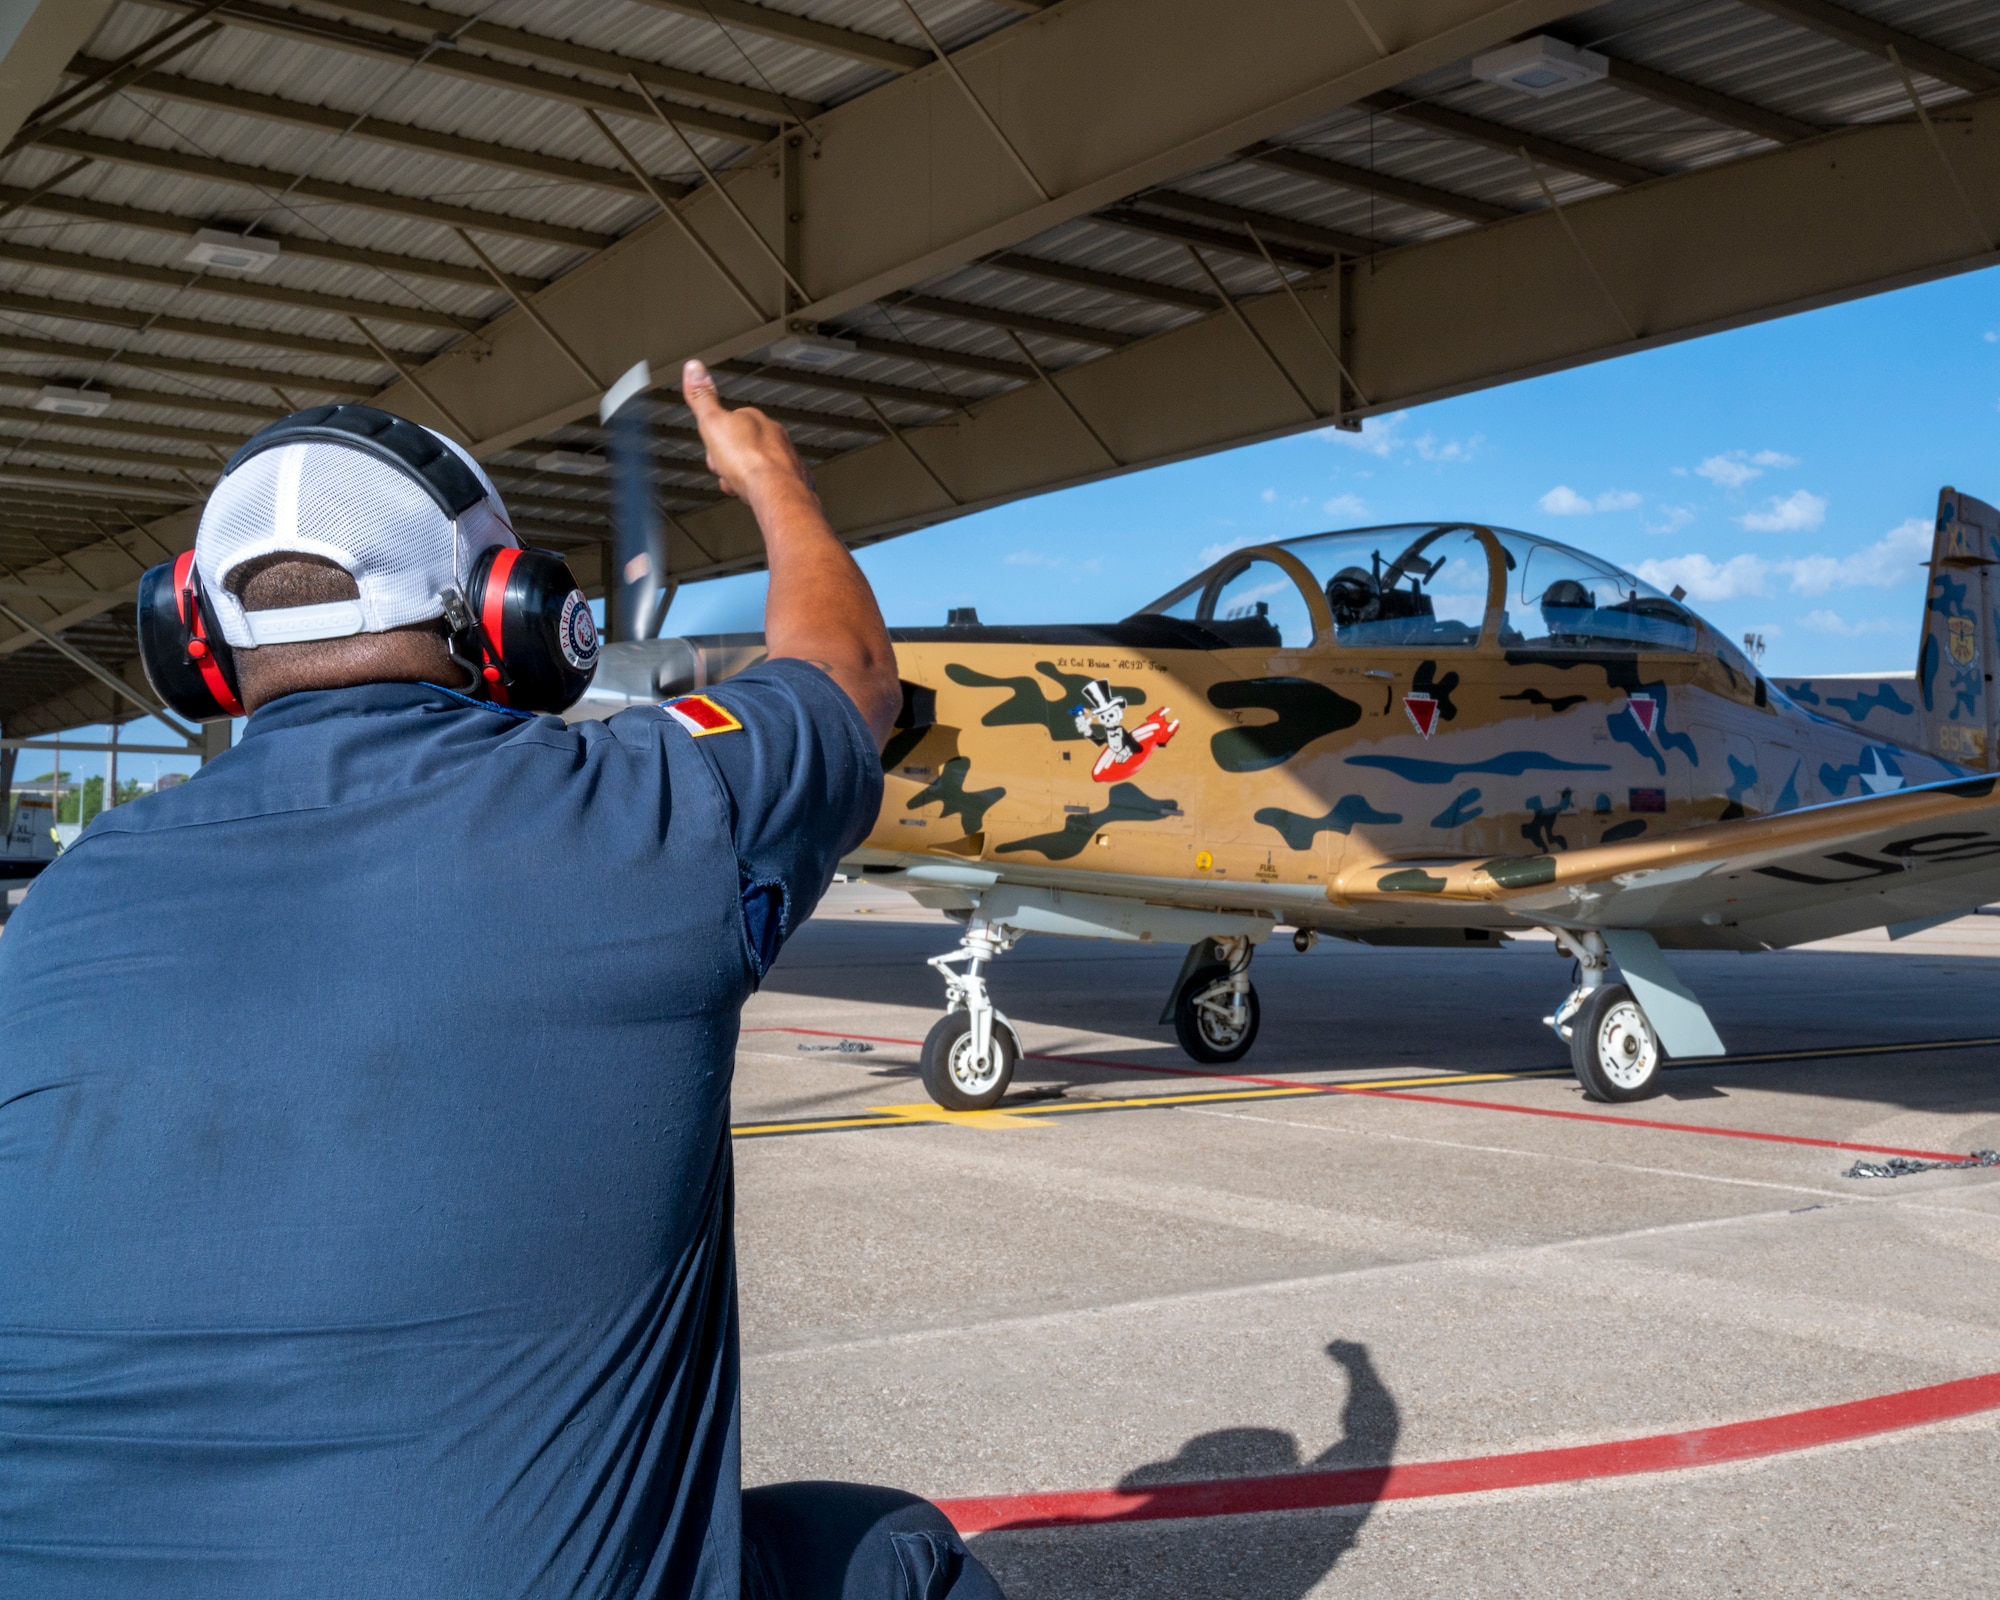 Alex Arriaga, 47th Flying Training Wing crew chief, gives a thumbs up to the pilots as they check the control surfaces of a T-6 Texan II on Laughlin Air Force Base on September 8, 2021. Flight control checks help ensure that the aircraft the pilots are flying will respond in the way they expect. (U.S. Air Force Photo by Senior Airman Nicholas Larsen)